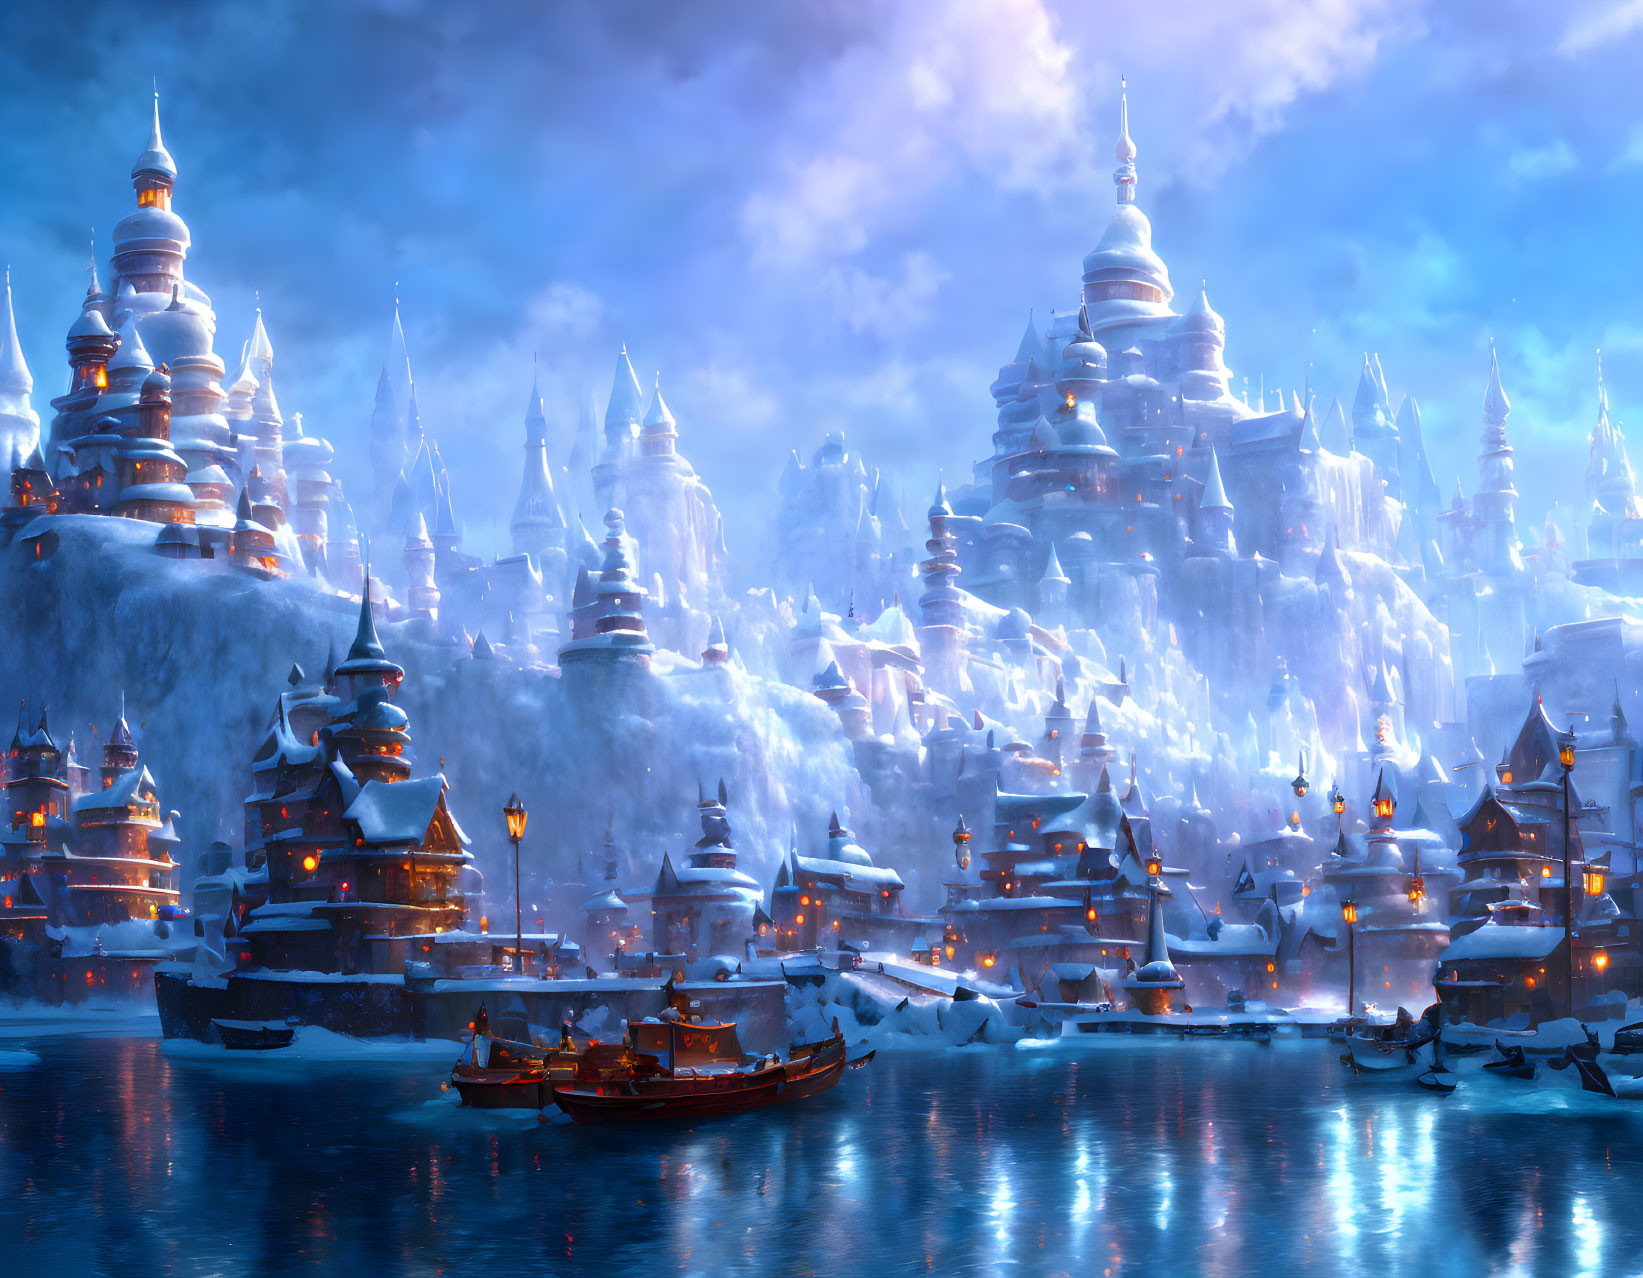 Snow-covered oriental buildings in a fantastical winter scene